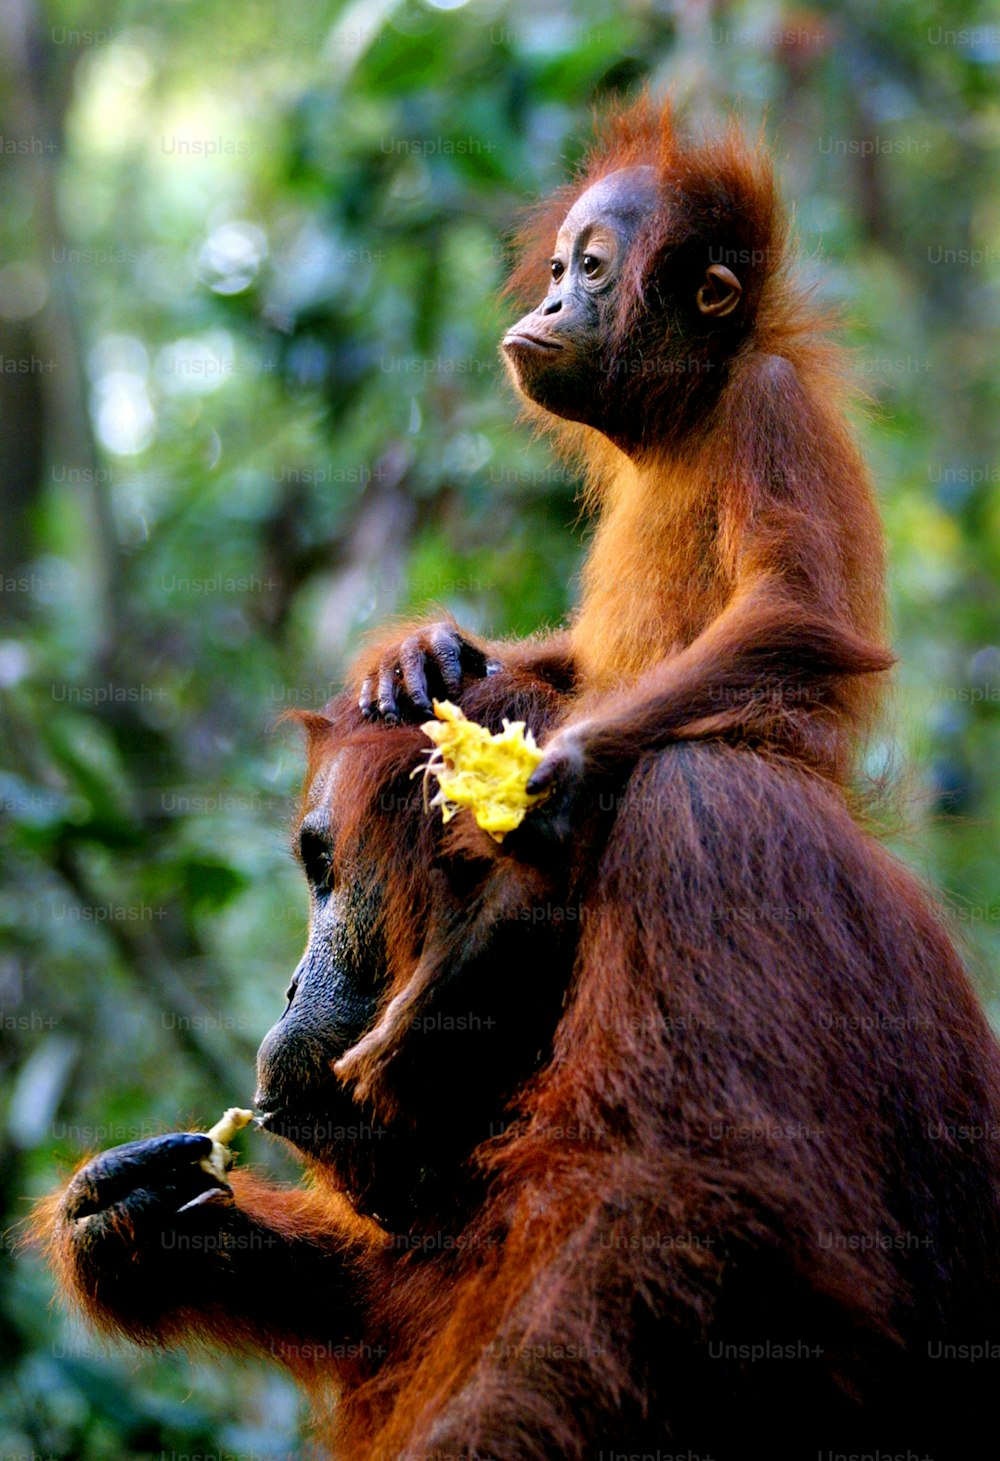 a brown and black animal holding a yellow flower